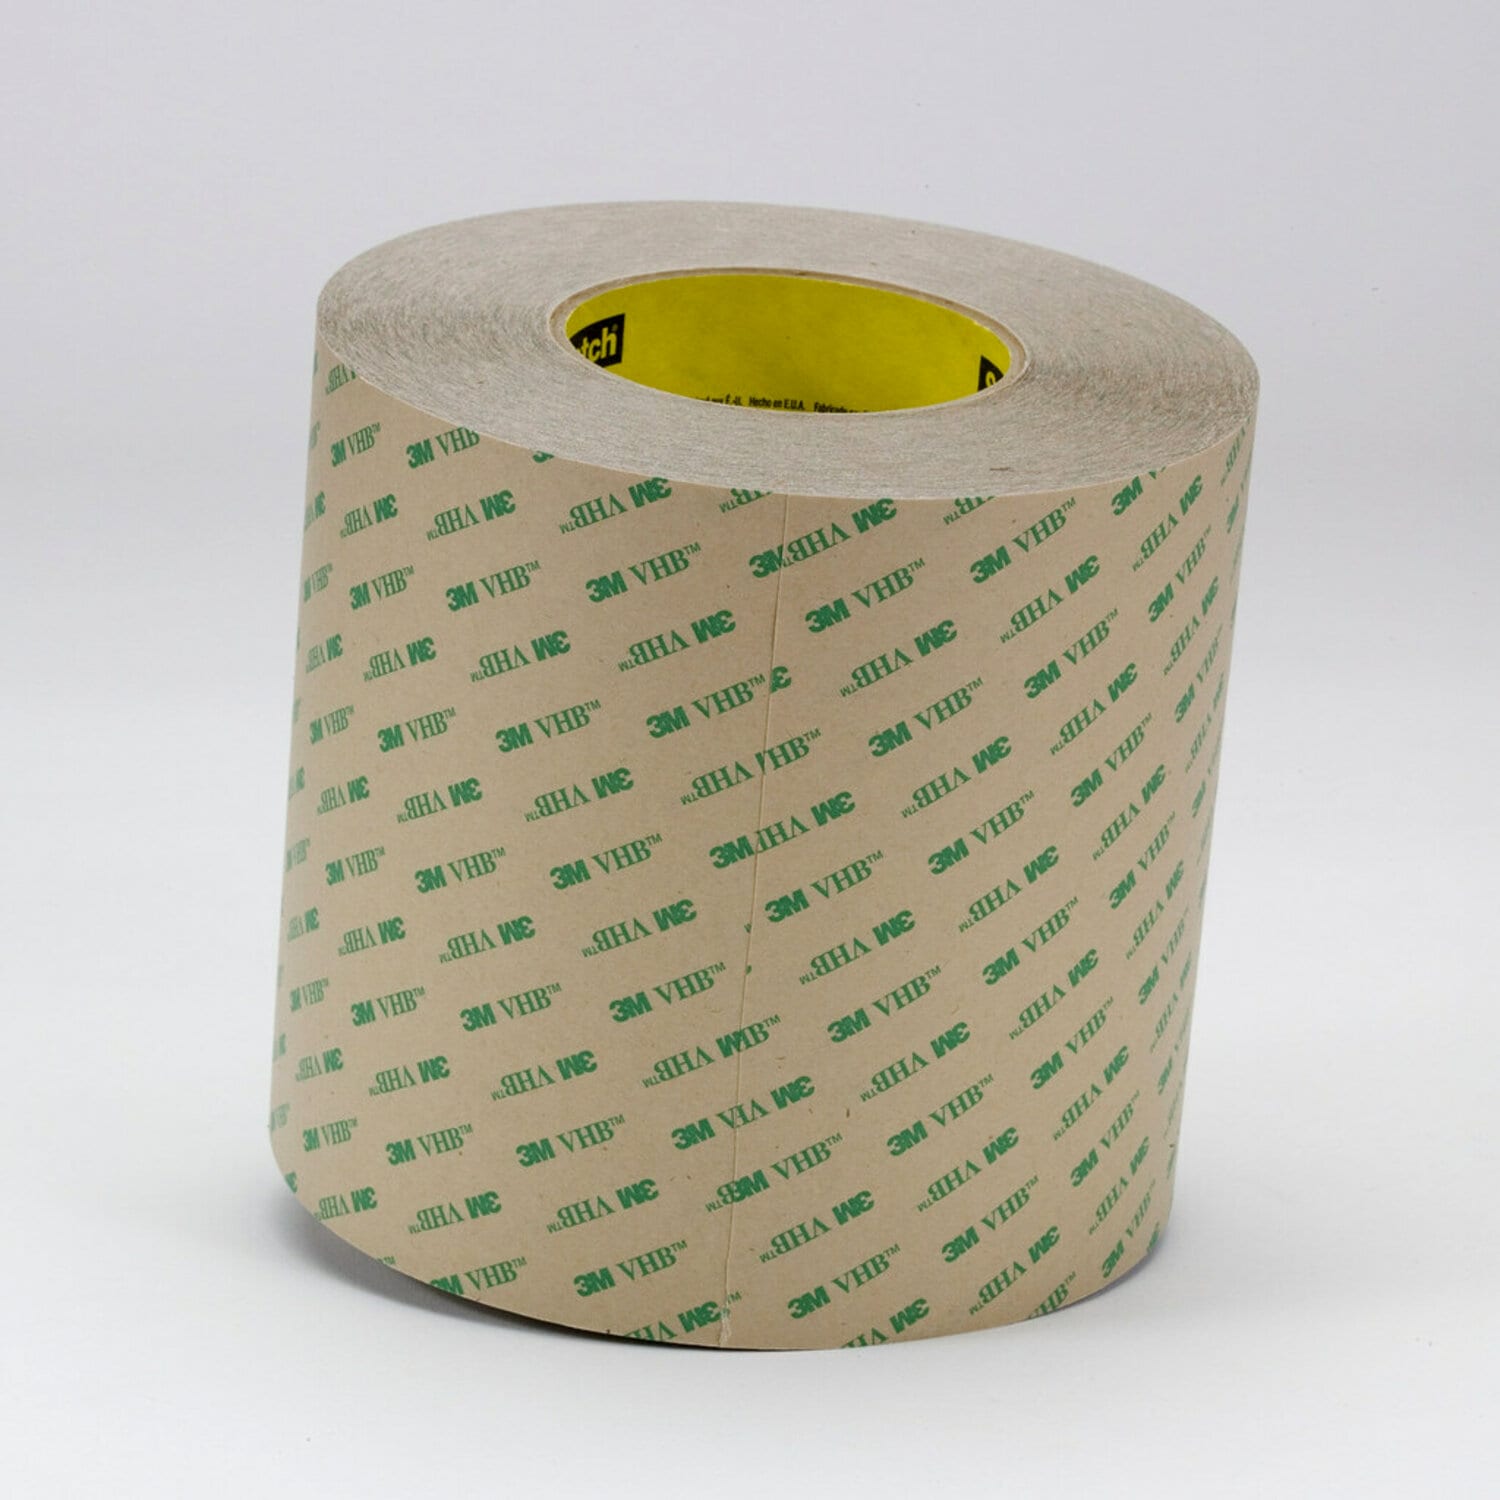 7010373112 - 3M VHB Adhesive Transfer Tape F9473PC, Clear, 3 in x 60 yd, 10 Mil,
3/Case